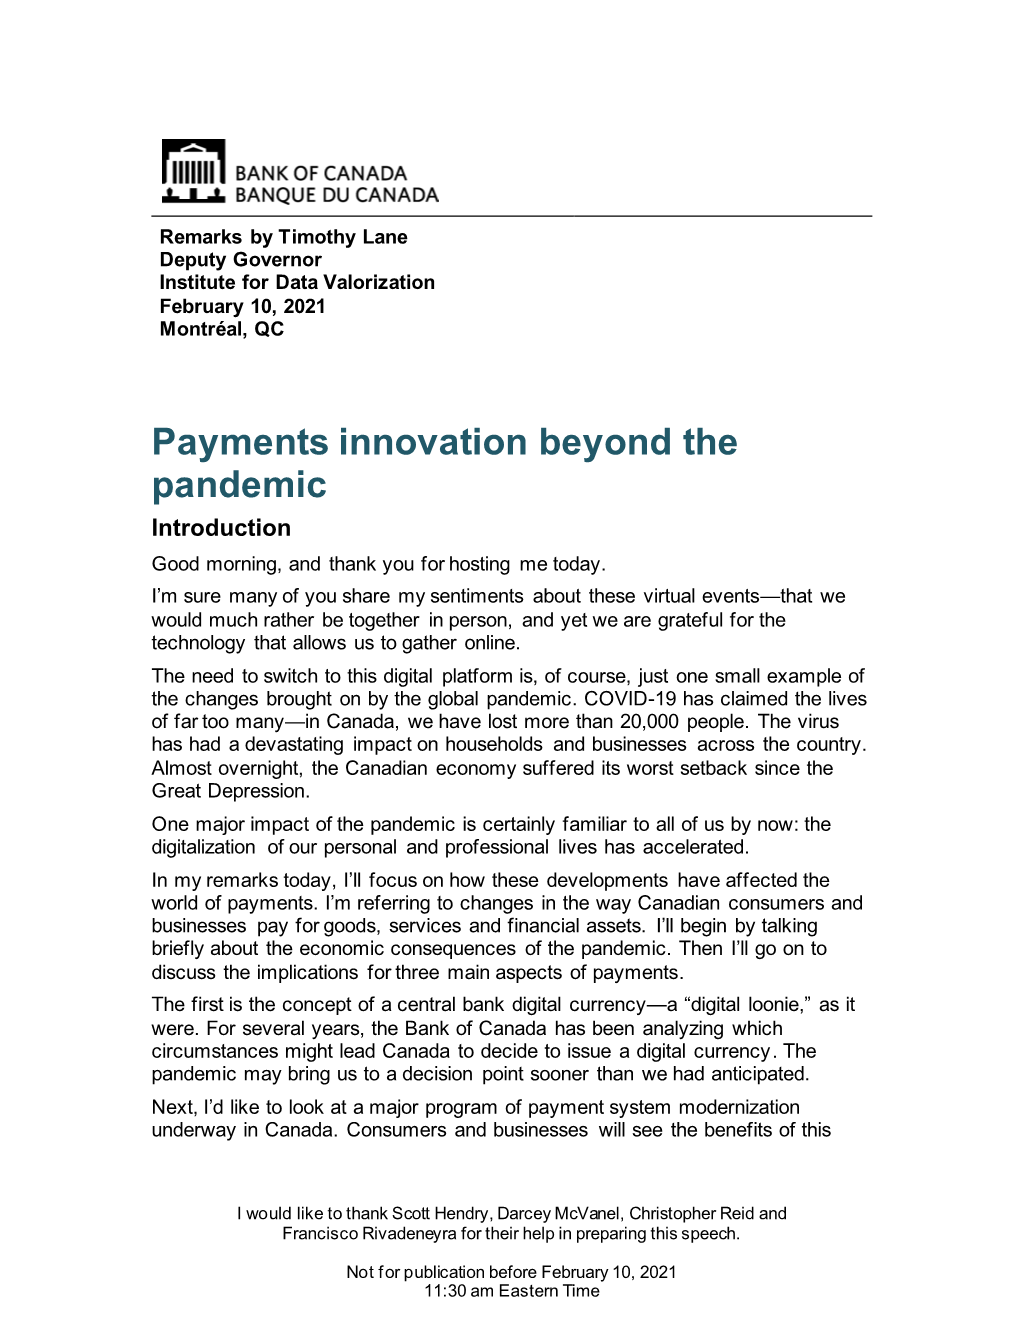 Timothy Lane: Payments Innovation Beyond the Pandemic